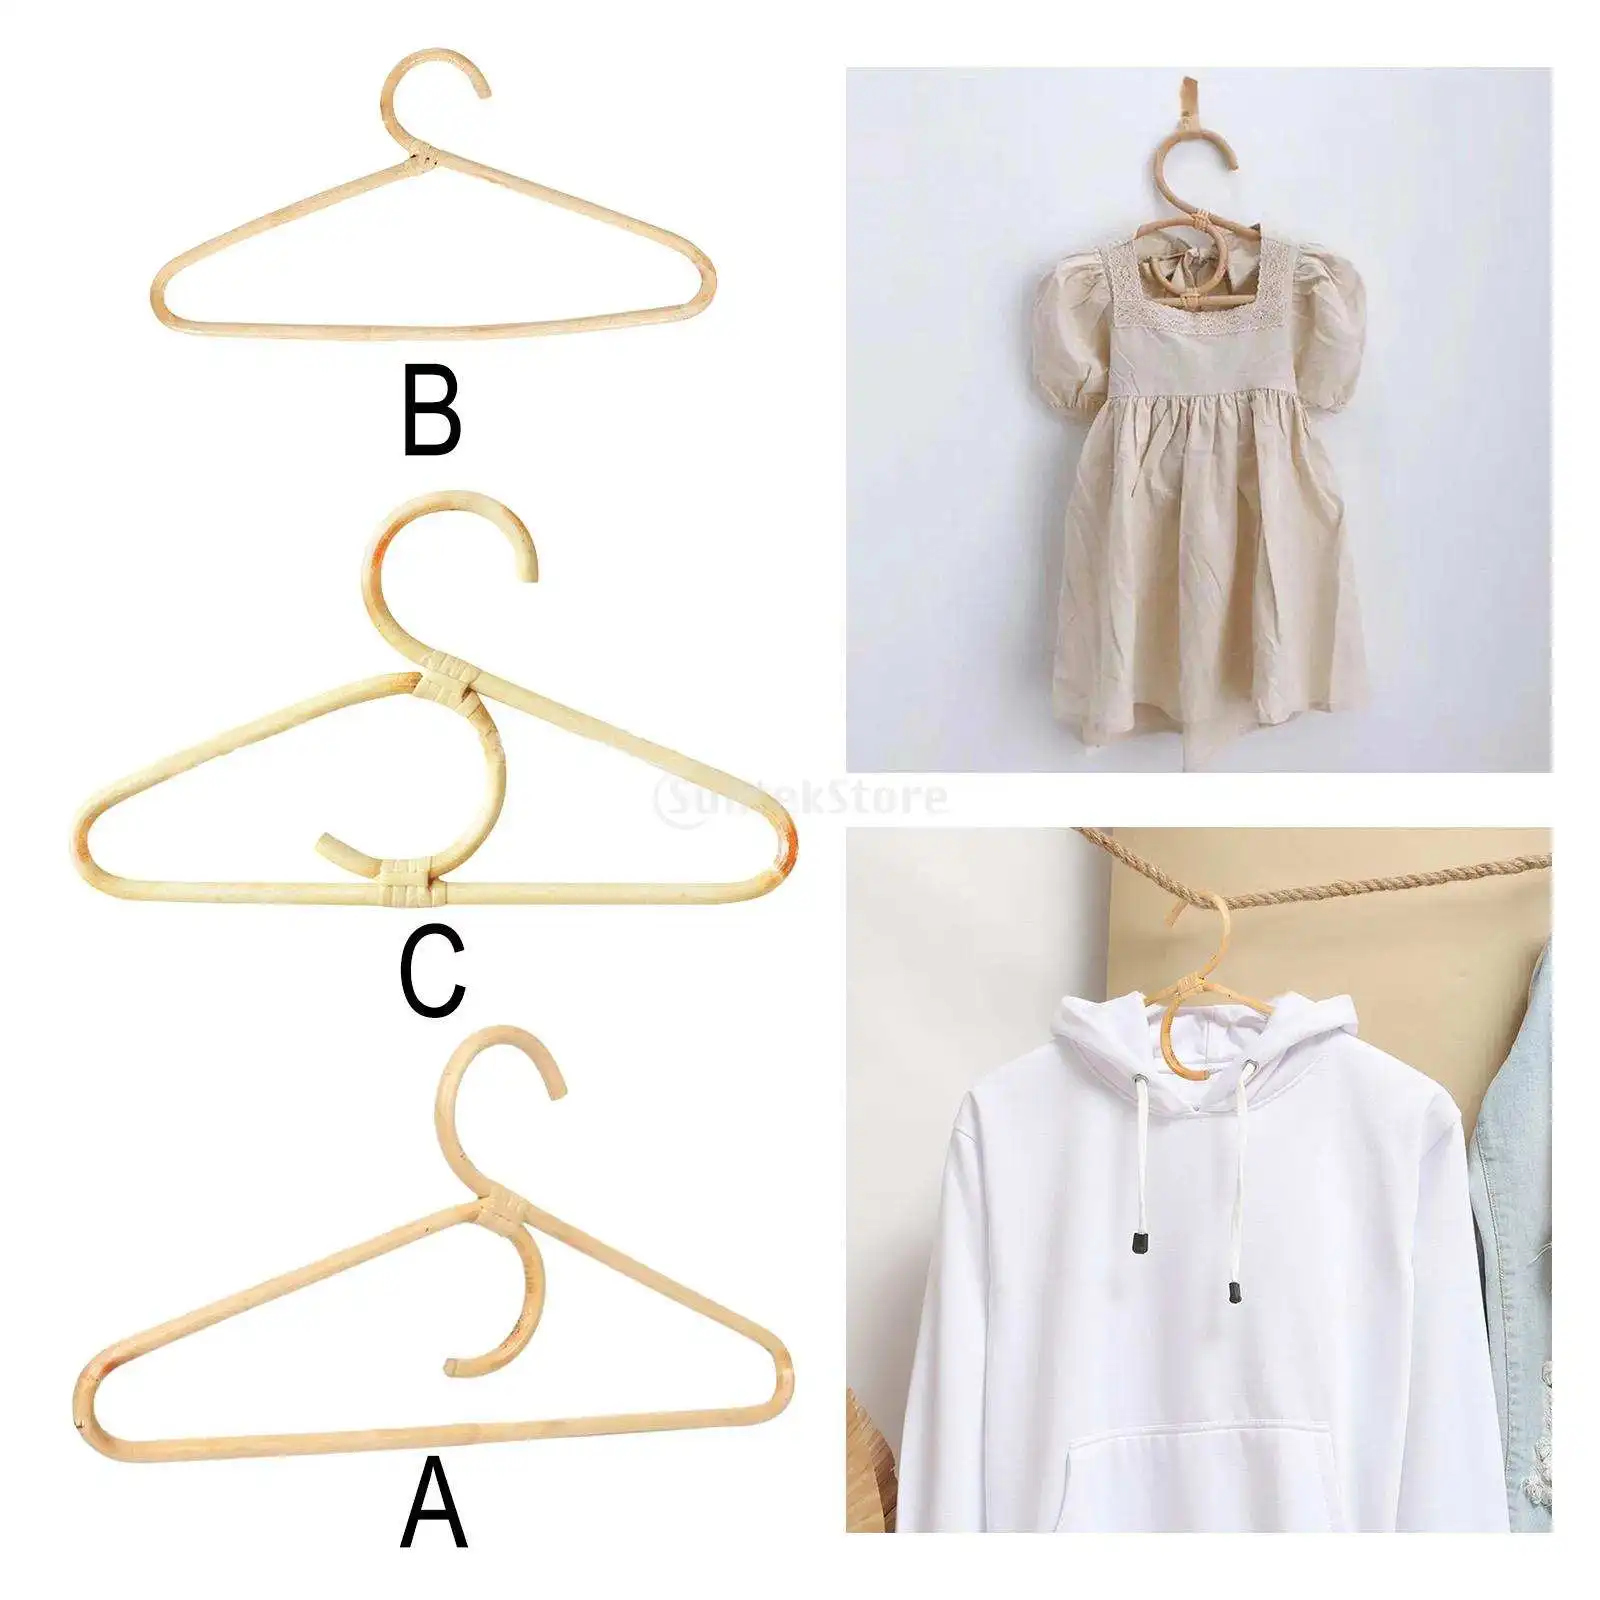 Rattan Clothes Hanger Kids Garments Adults Coast Scarf Girl Dress Tops Outfits Doll Pants Hanging Rack Holder for Home